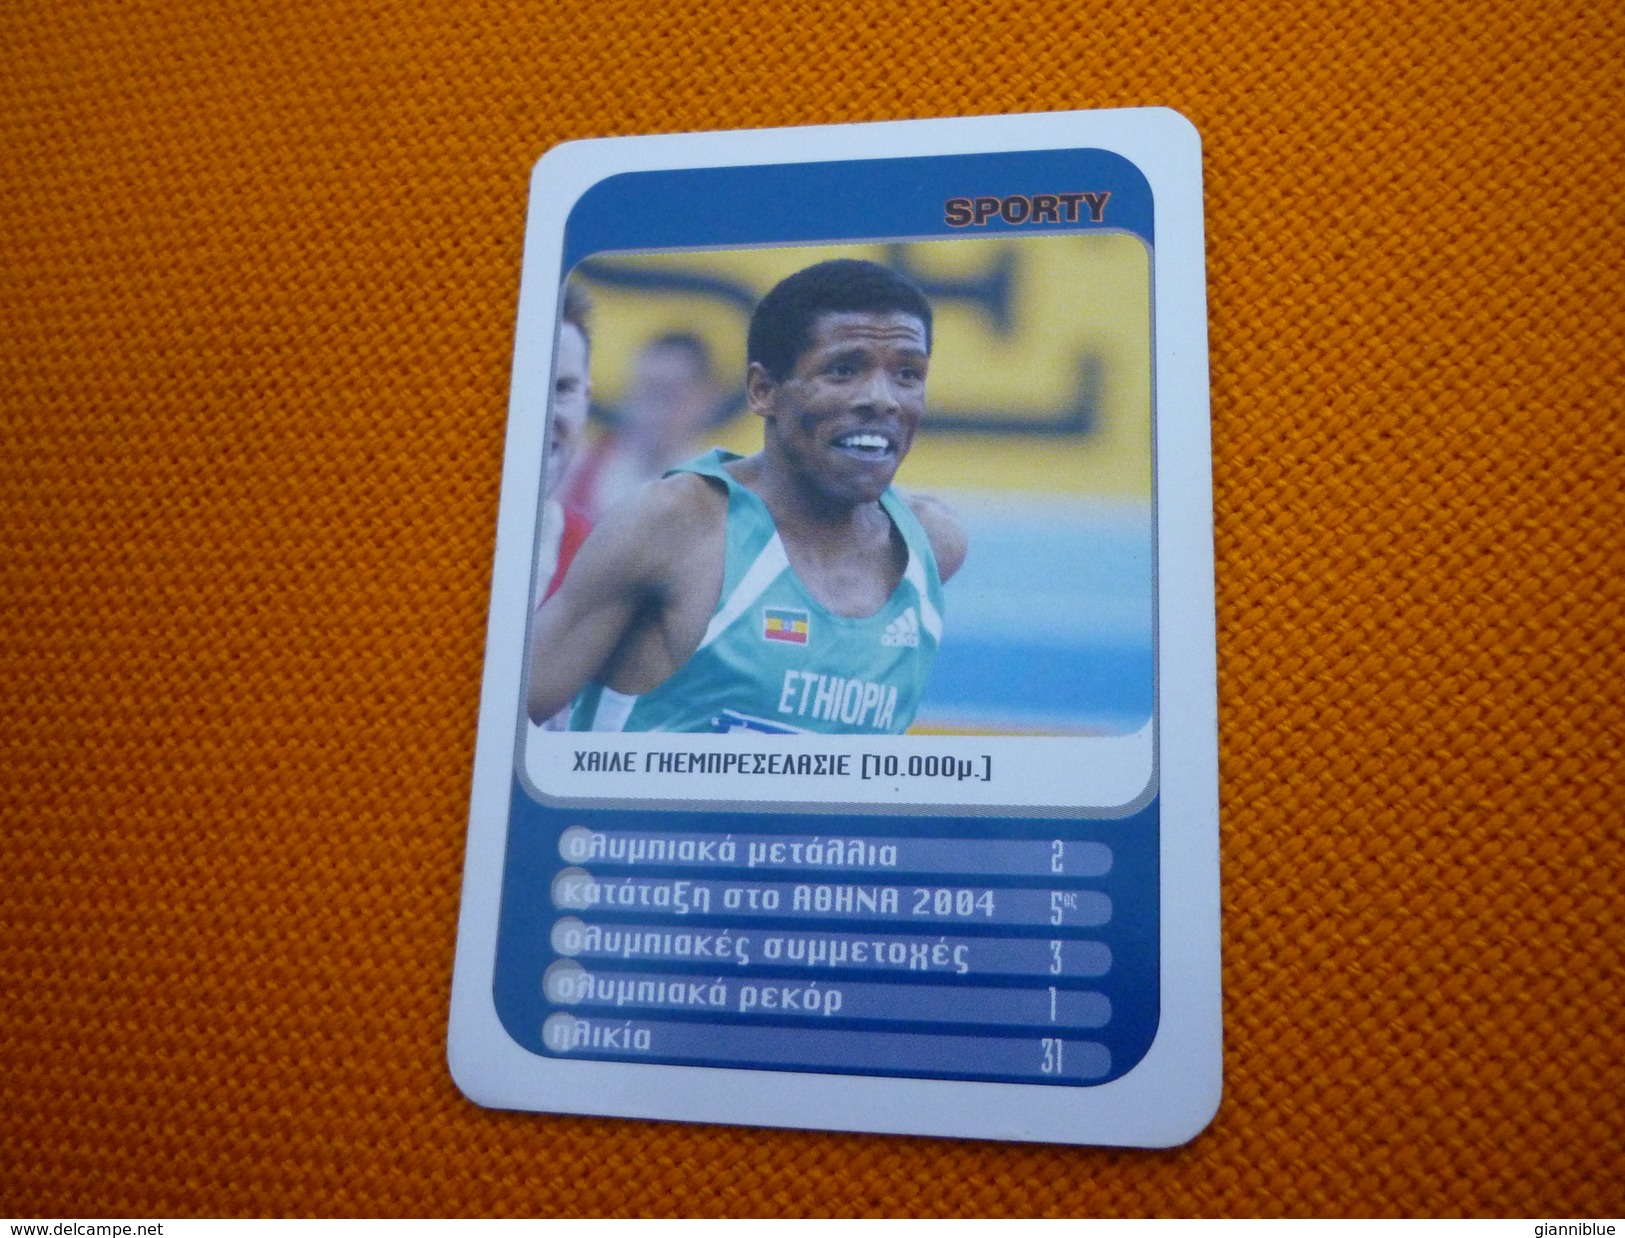 Haile Gebrselassie Ethiopian Long Distance Runner Run Athlete Athens 2004 Olympic Games Greece Greek Trading Card - Trading Cards